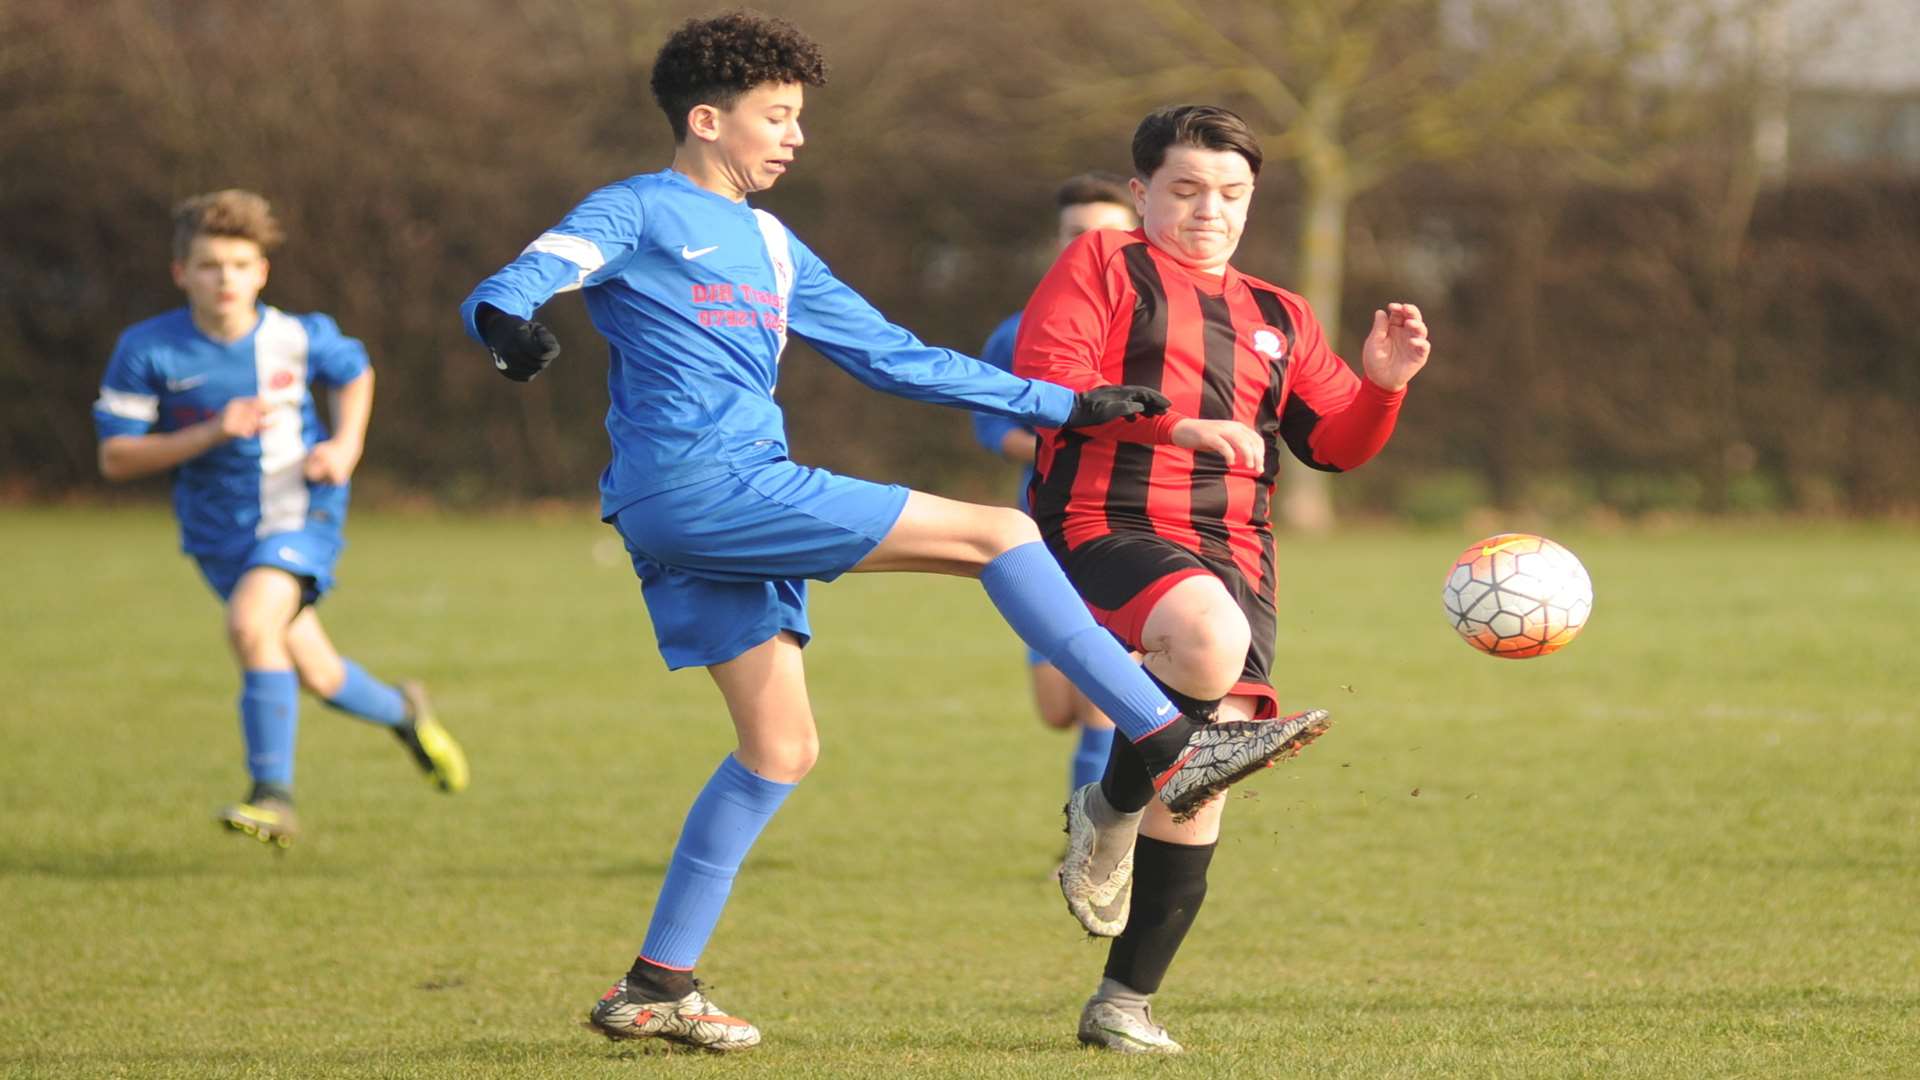 Hempstead Valley (blue) challenge Meopham Colts in Under-14 Division 1 Picture: Steve Crispe